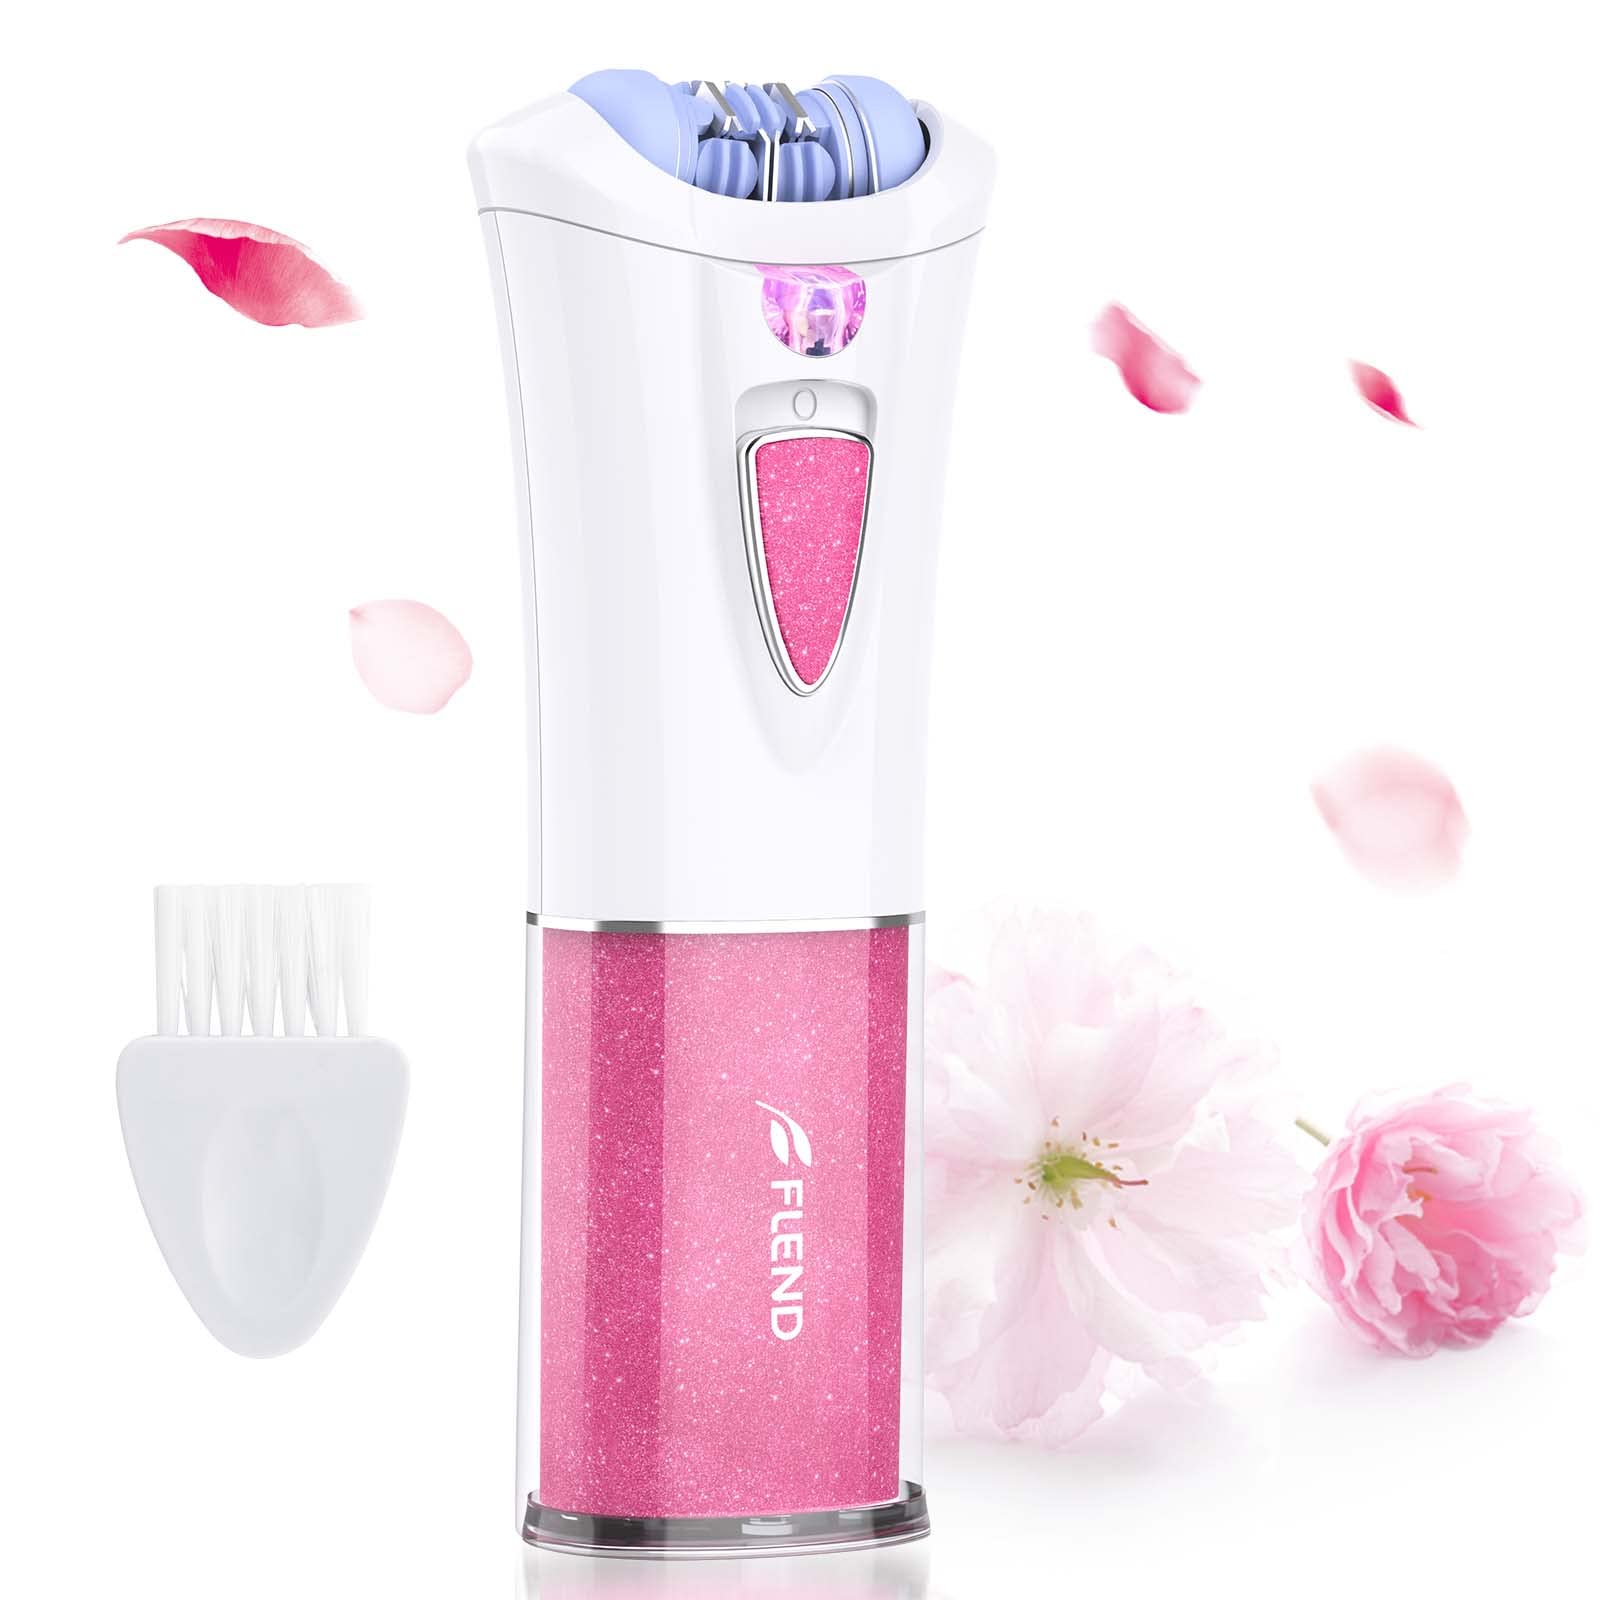 Finishing Touch Flawless Facial Hair Remover for Women, Electric Face Razor  for Women with LED Light for Instant and Painless Hair Removal, Pink  Crystal & Rose Gold - Walmart.com